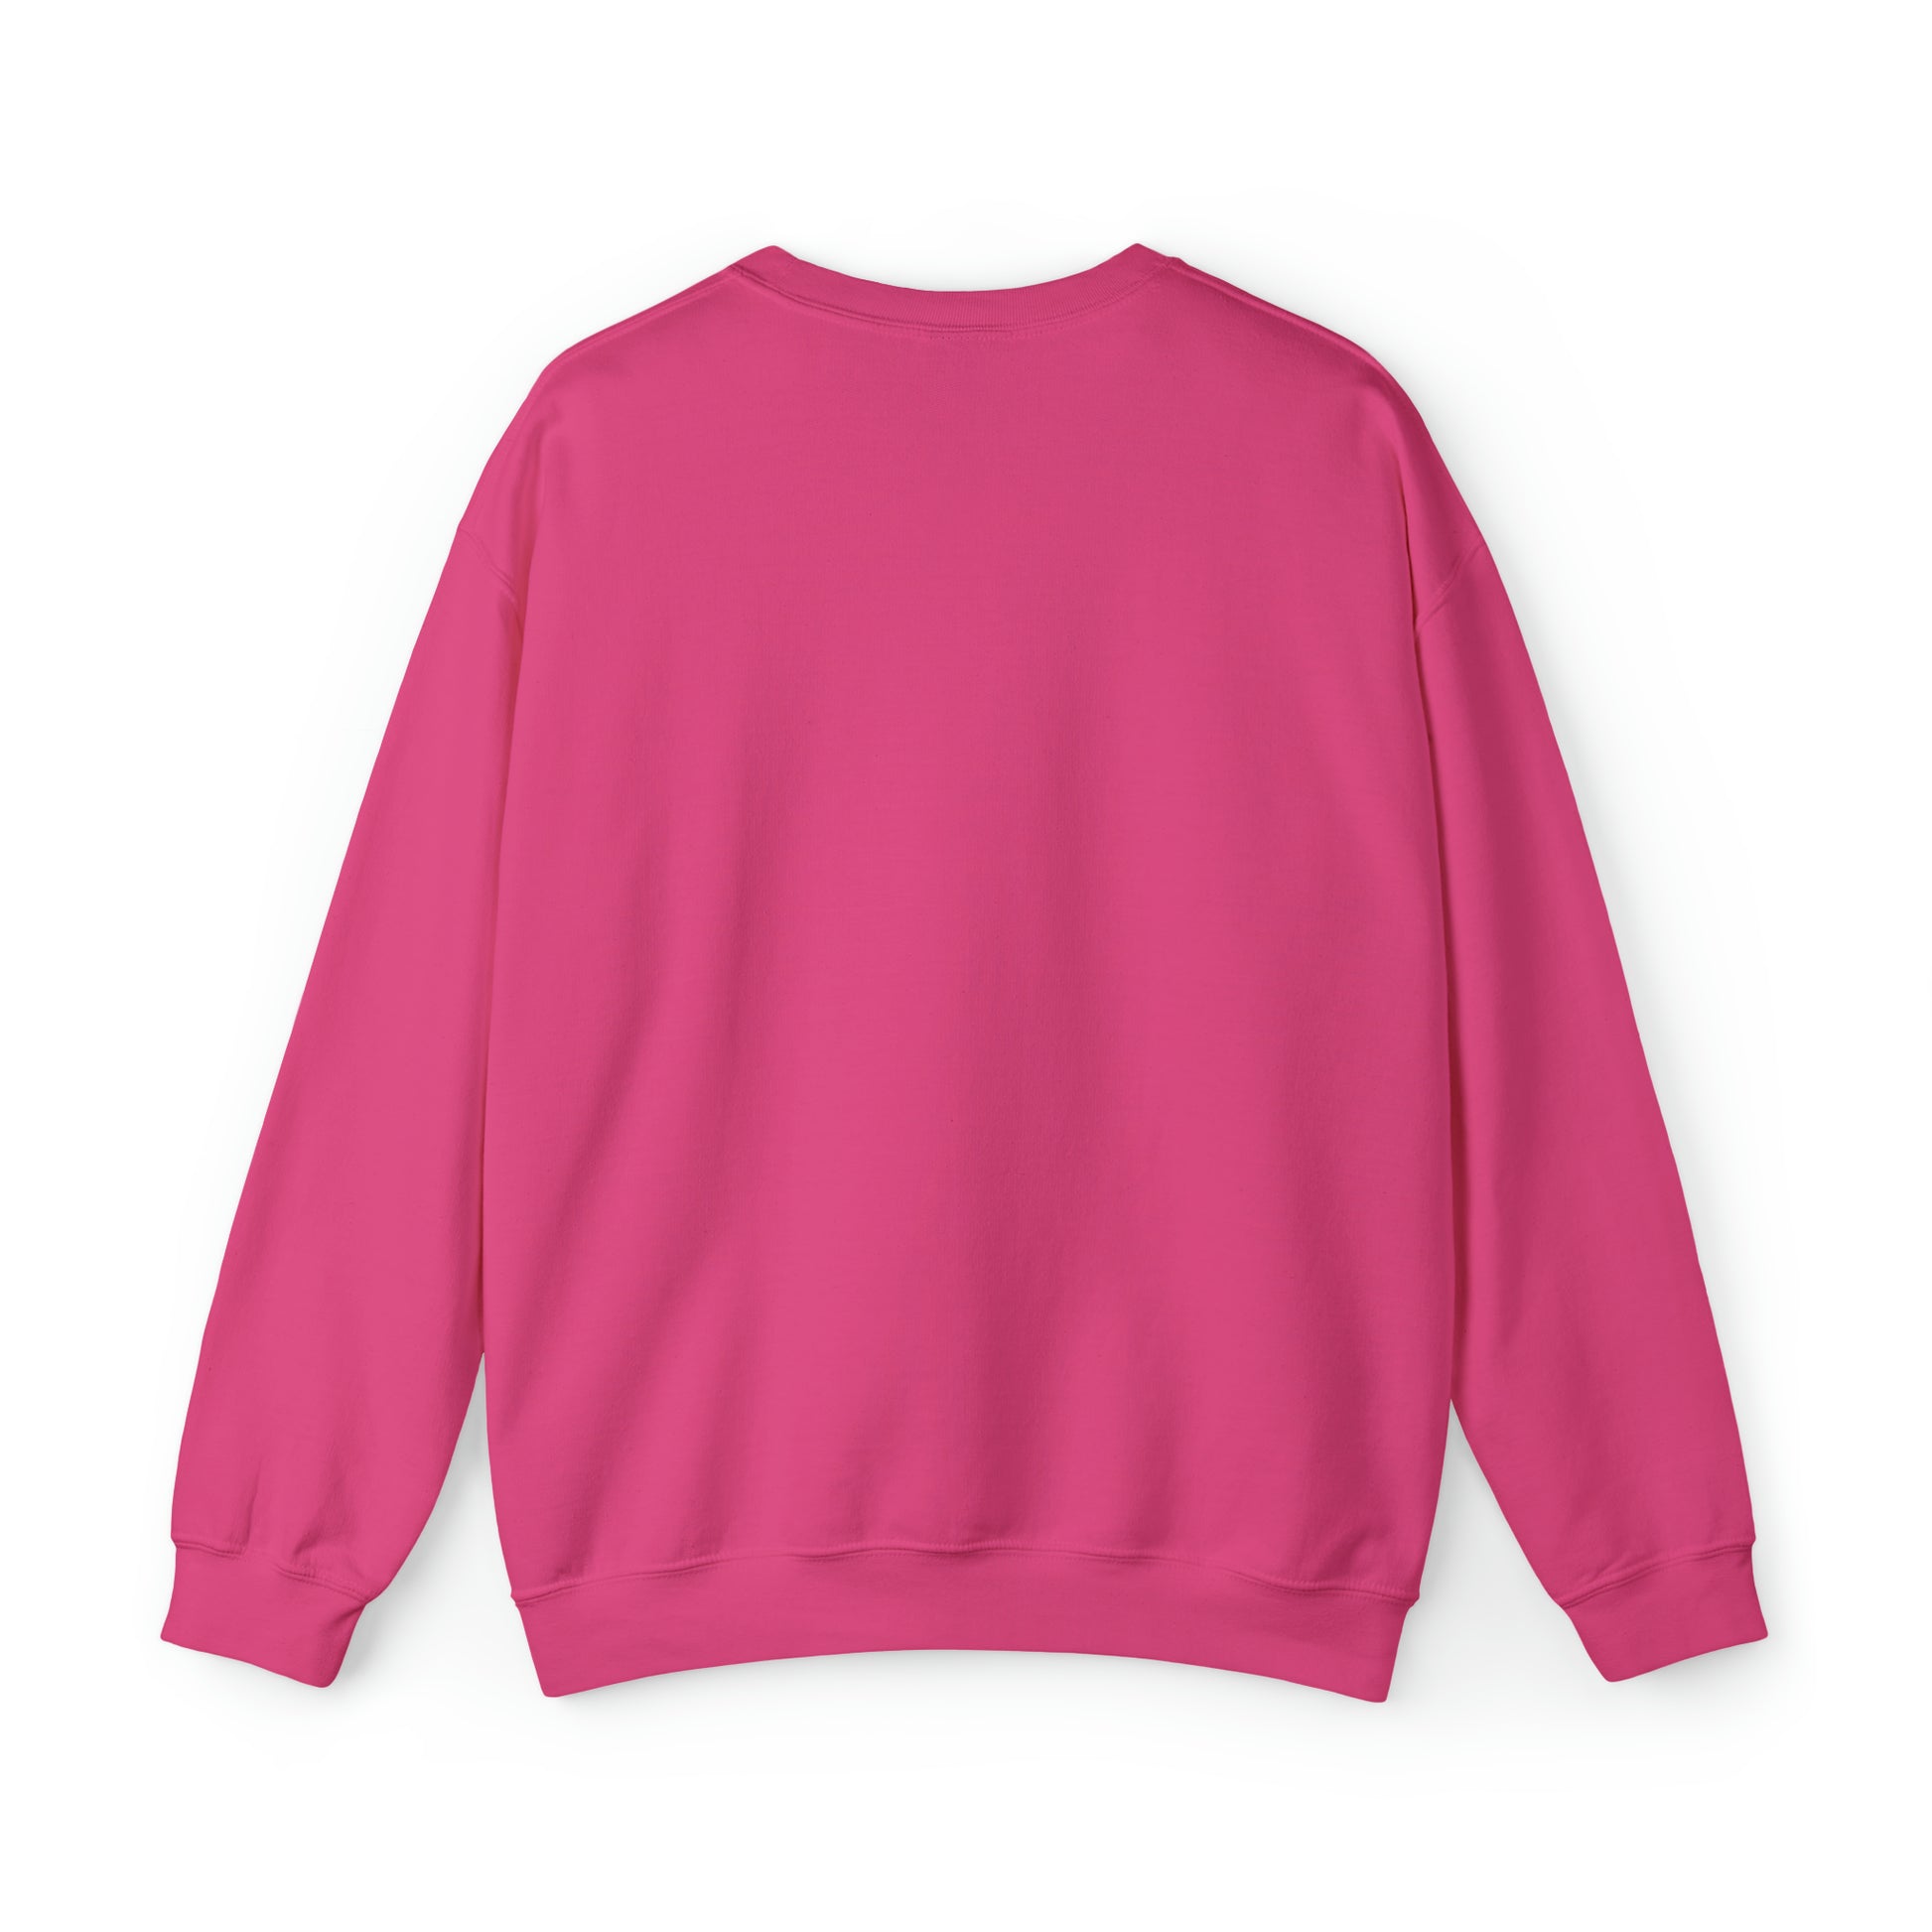 A cozy and ethical Printify Christmas Tree Sweatshirt, featuring the back of a pink sweatshirt on a white background.